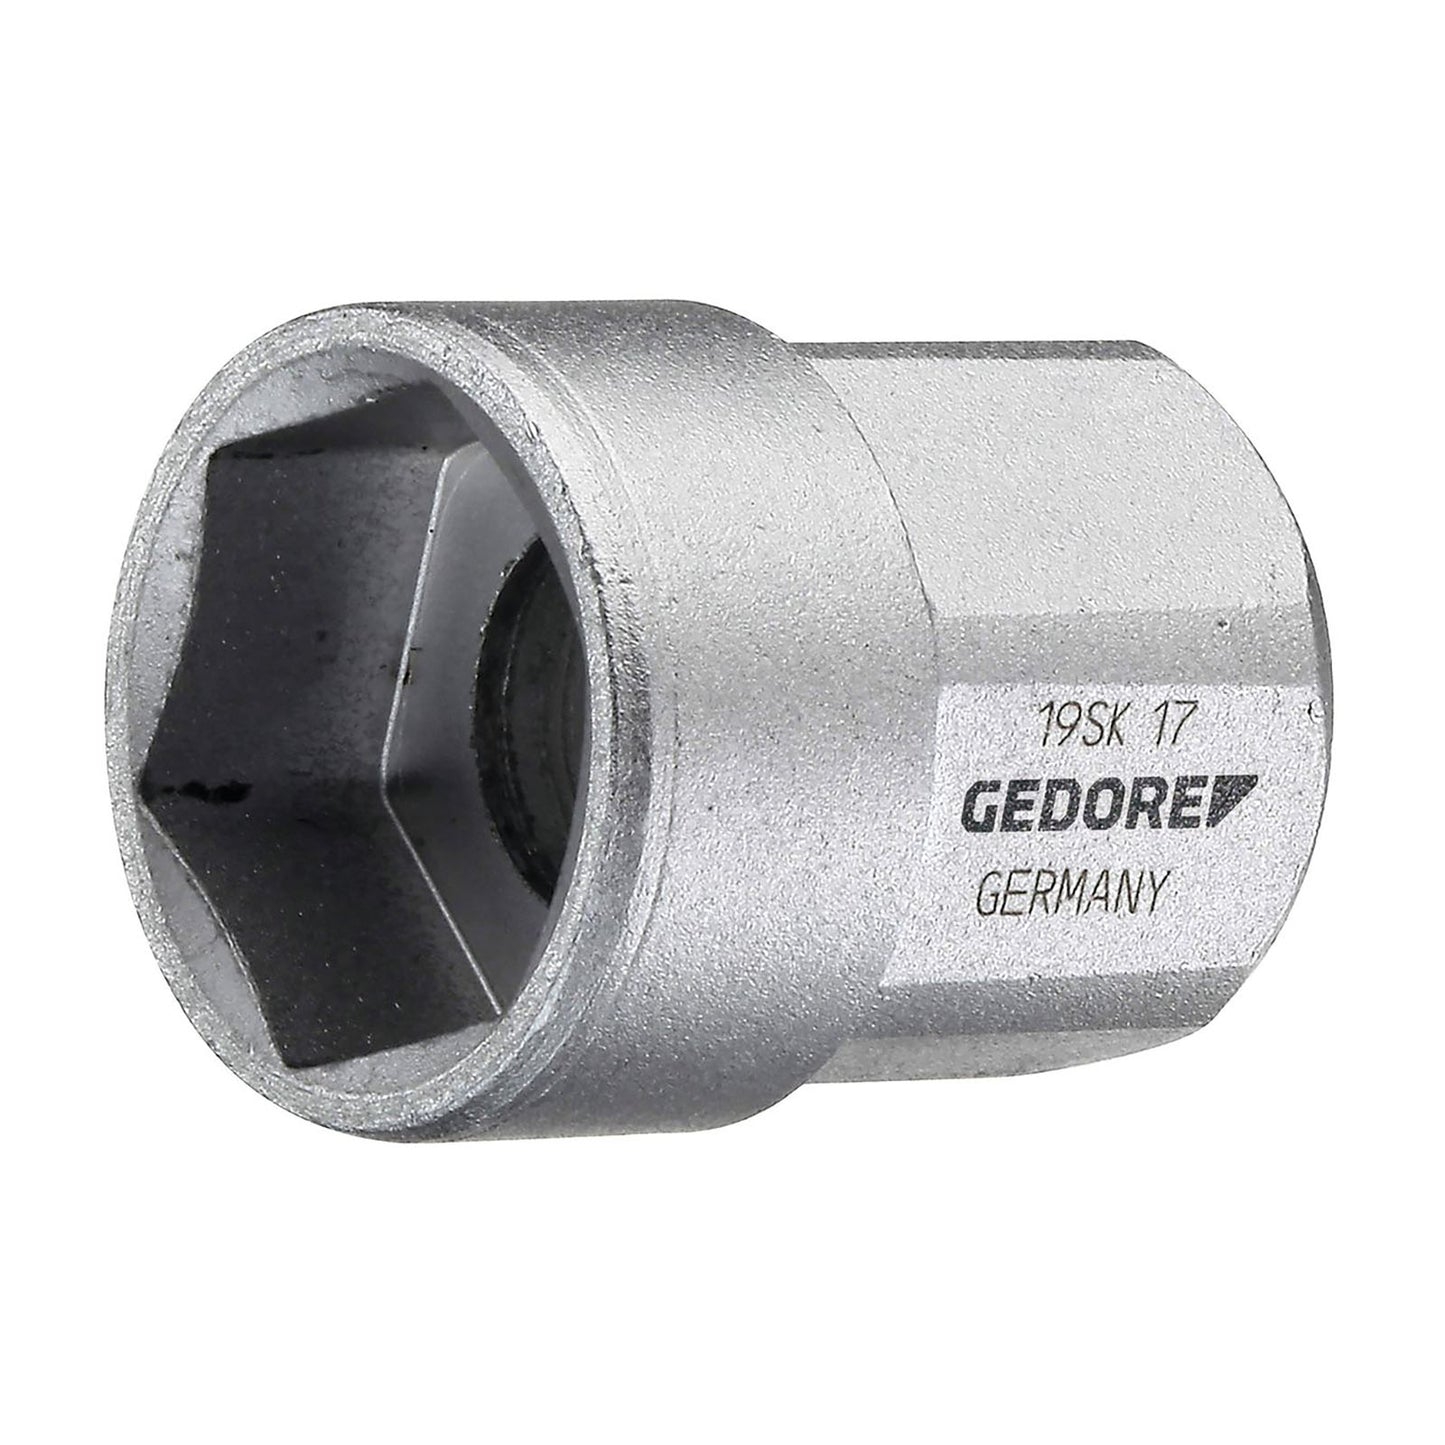 GEDORE 19 SK 24 - Special Hex socket 1/2", 24mm (2225980)